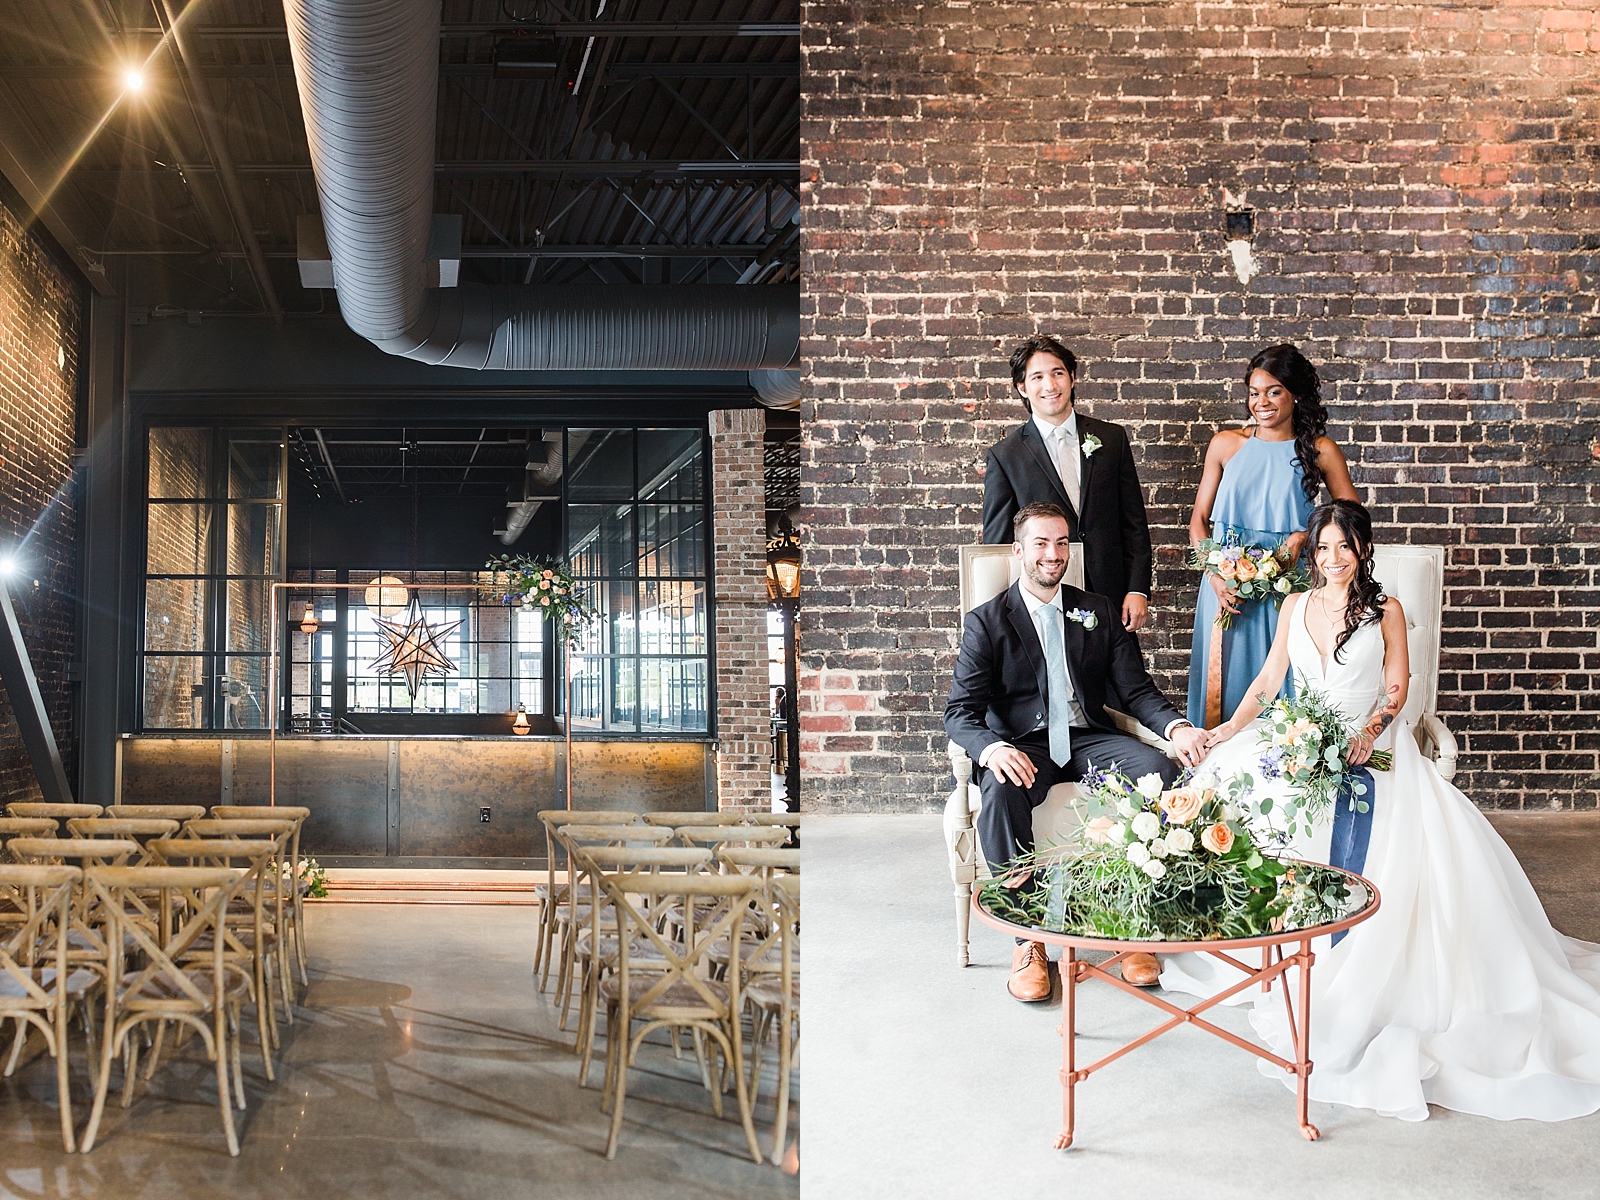 Glover Park Brewery Wedding Ceremony site and Bridal Party sitting in chairs Photos